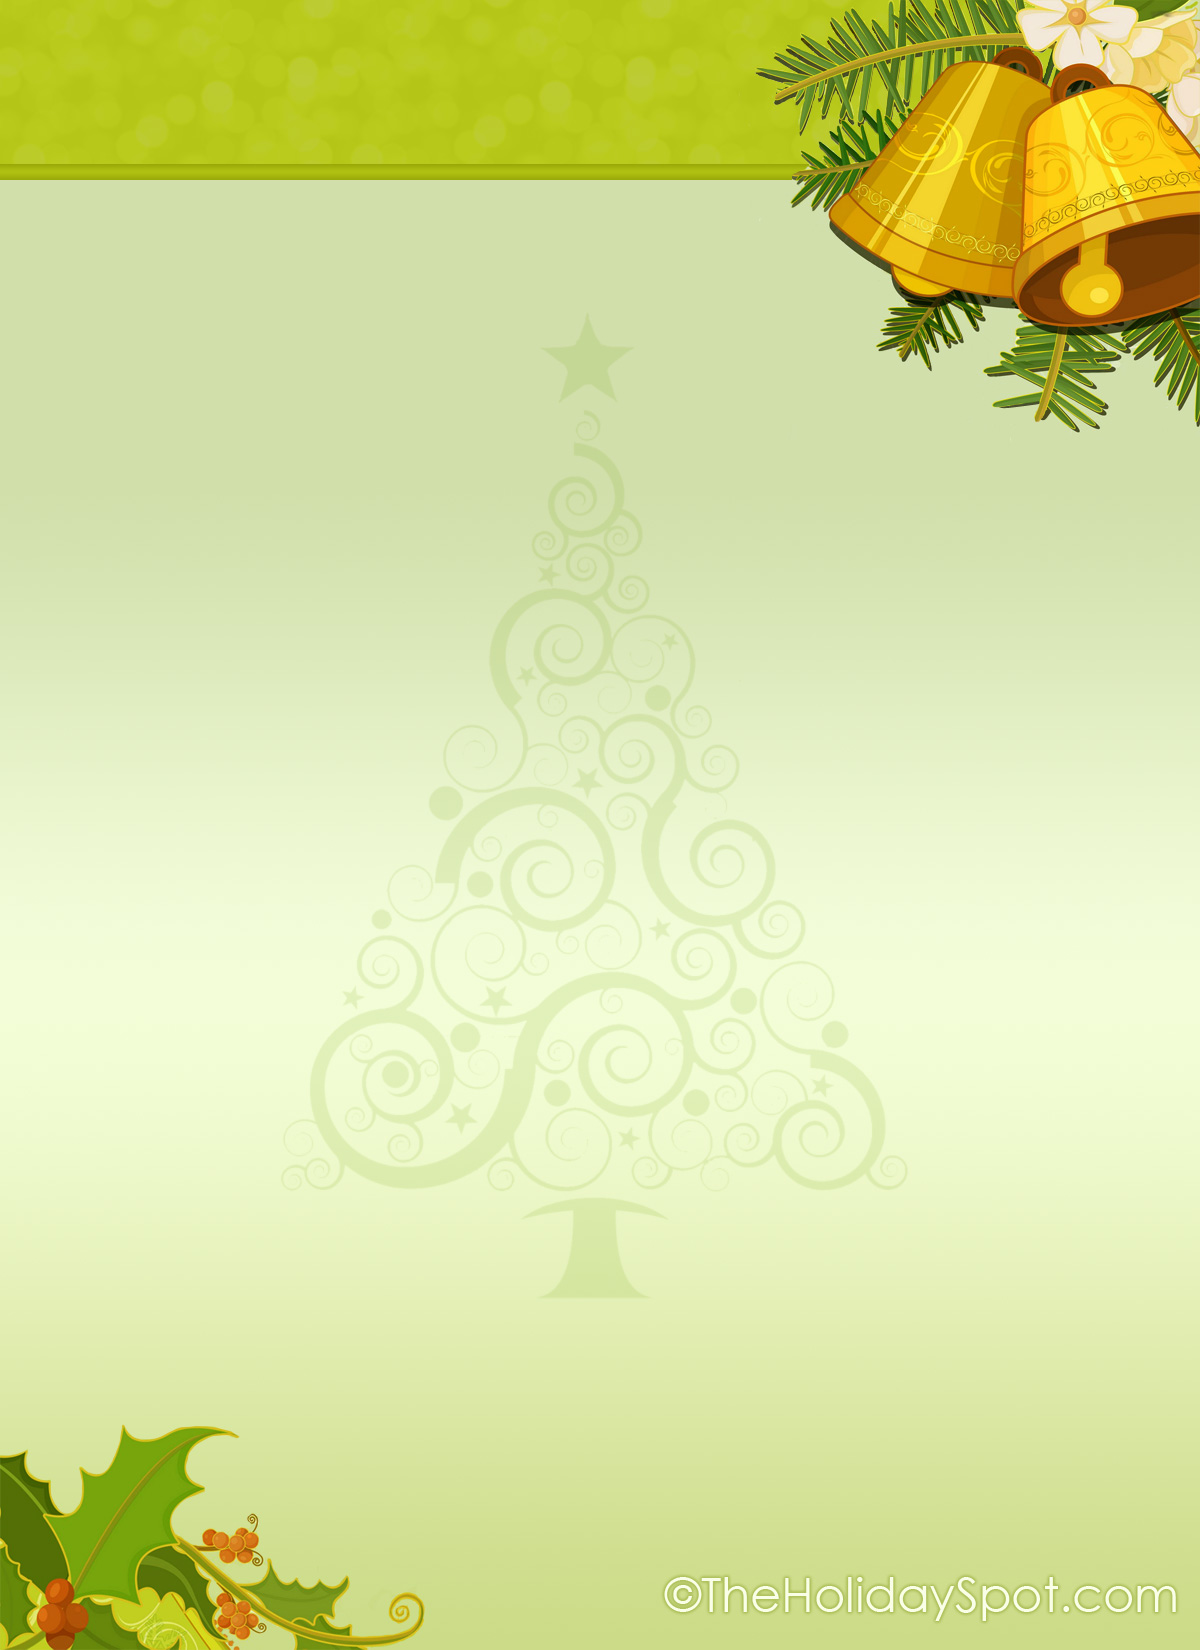 christmas letter backgrounds for free christmas printouts stationery and letterheads